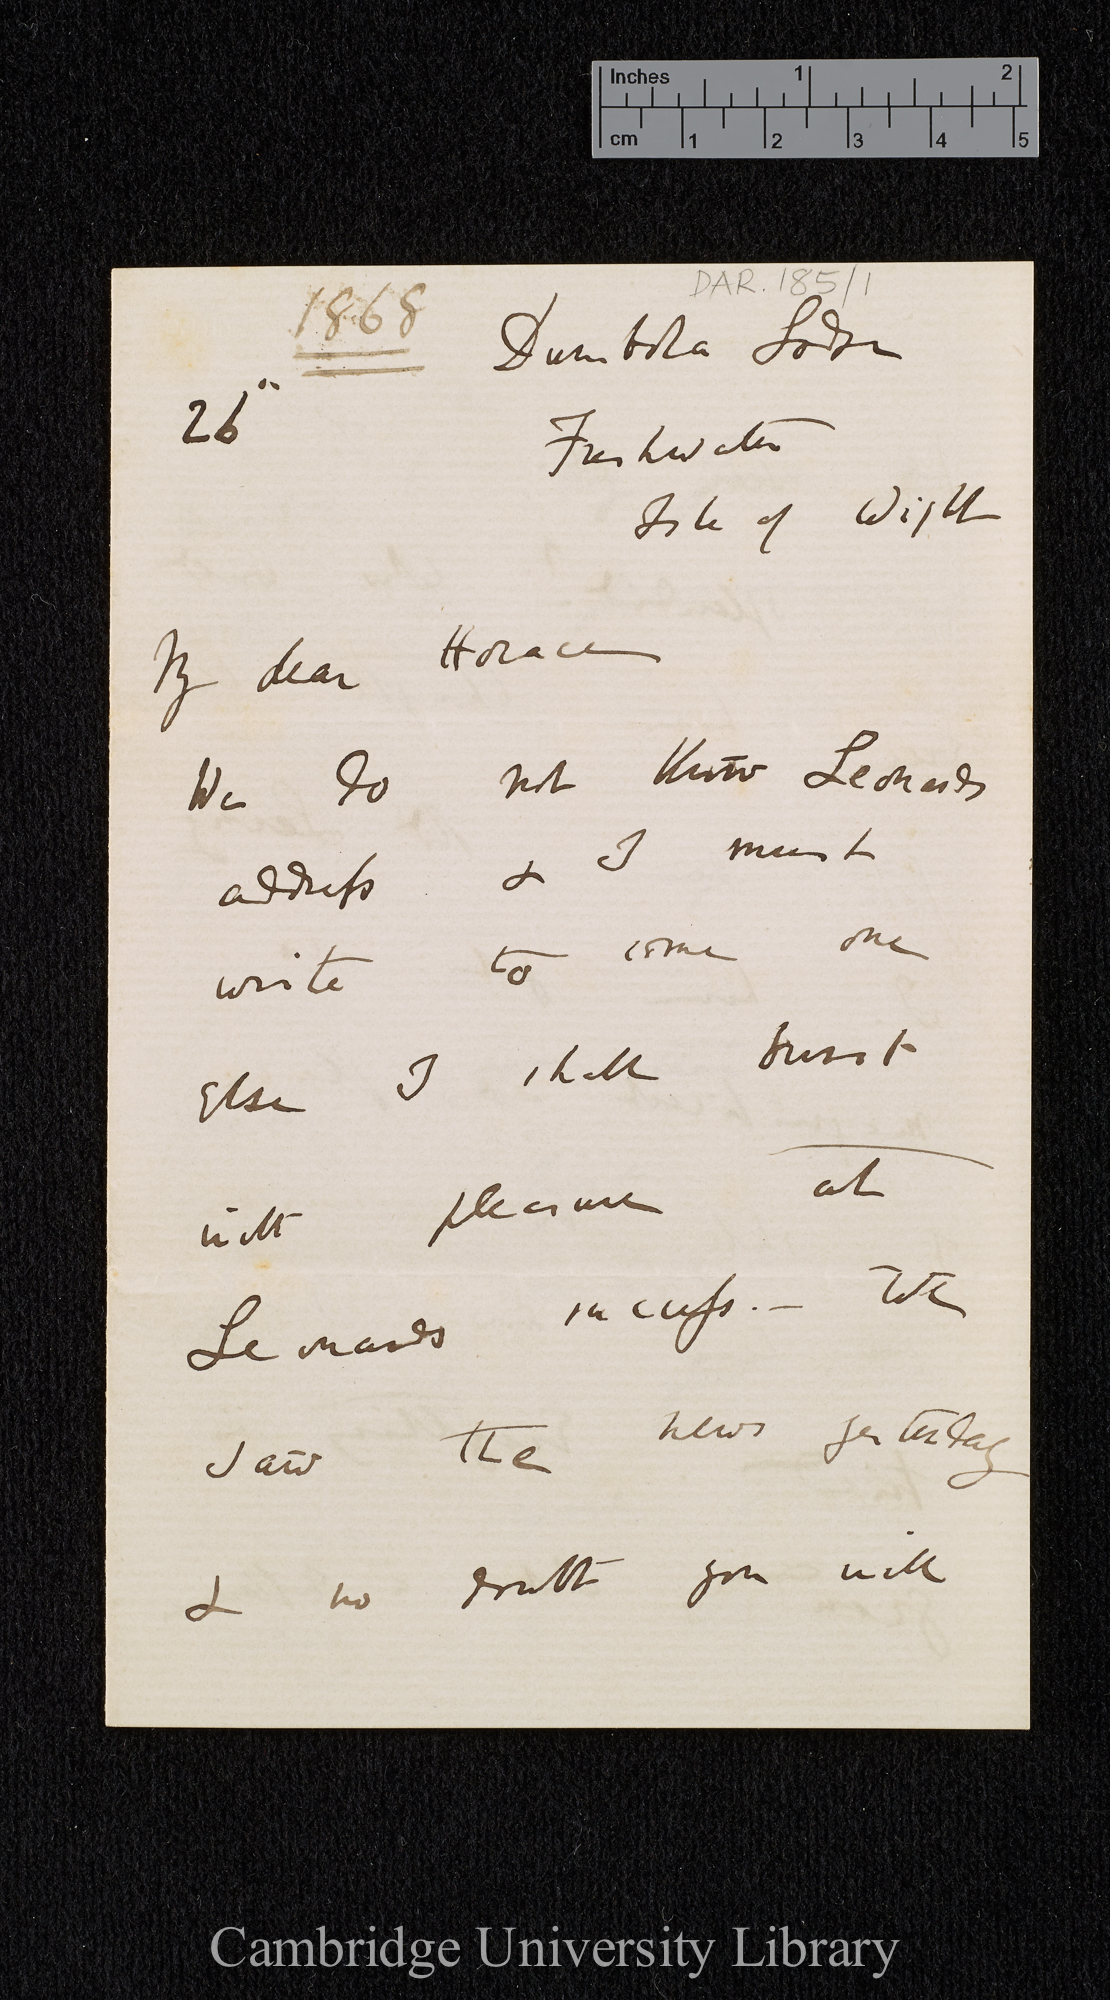 Miscellaneous letters from and to C. R. Darwin and others. Also individual leaves and fragments of Cirripedia and Origin, drafts: